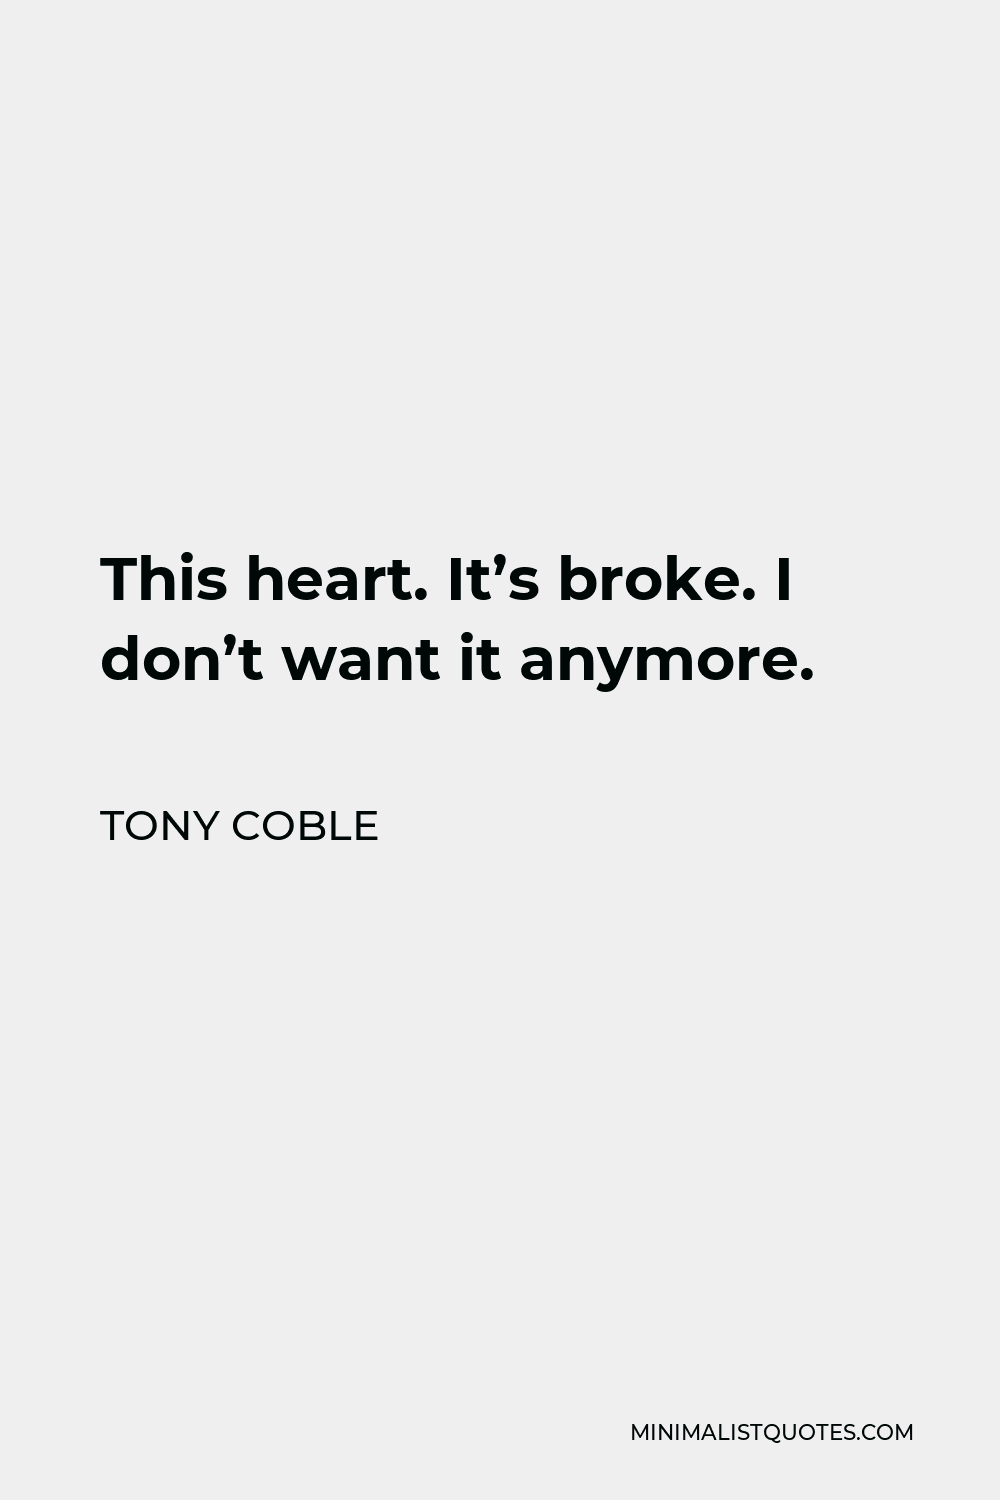 Tony Coble Quote - This heart. It’s broke. I don’t want it anymore.